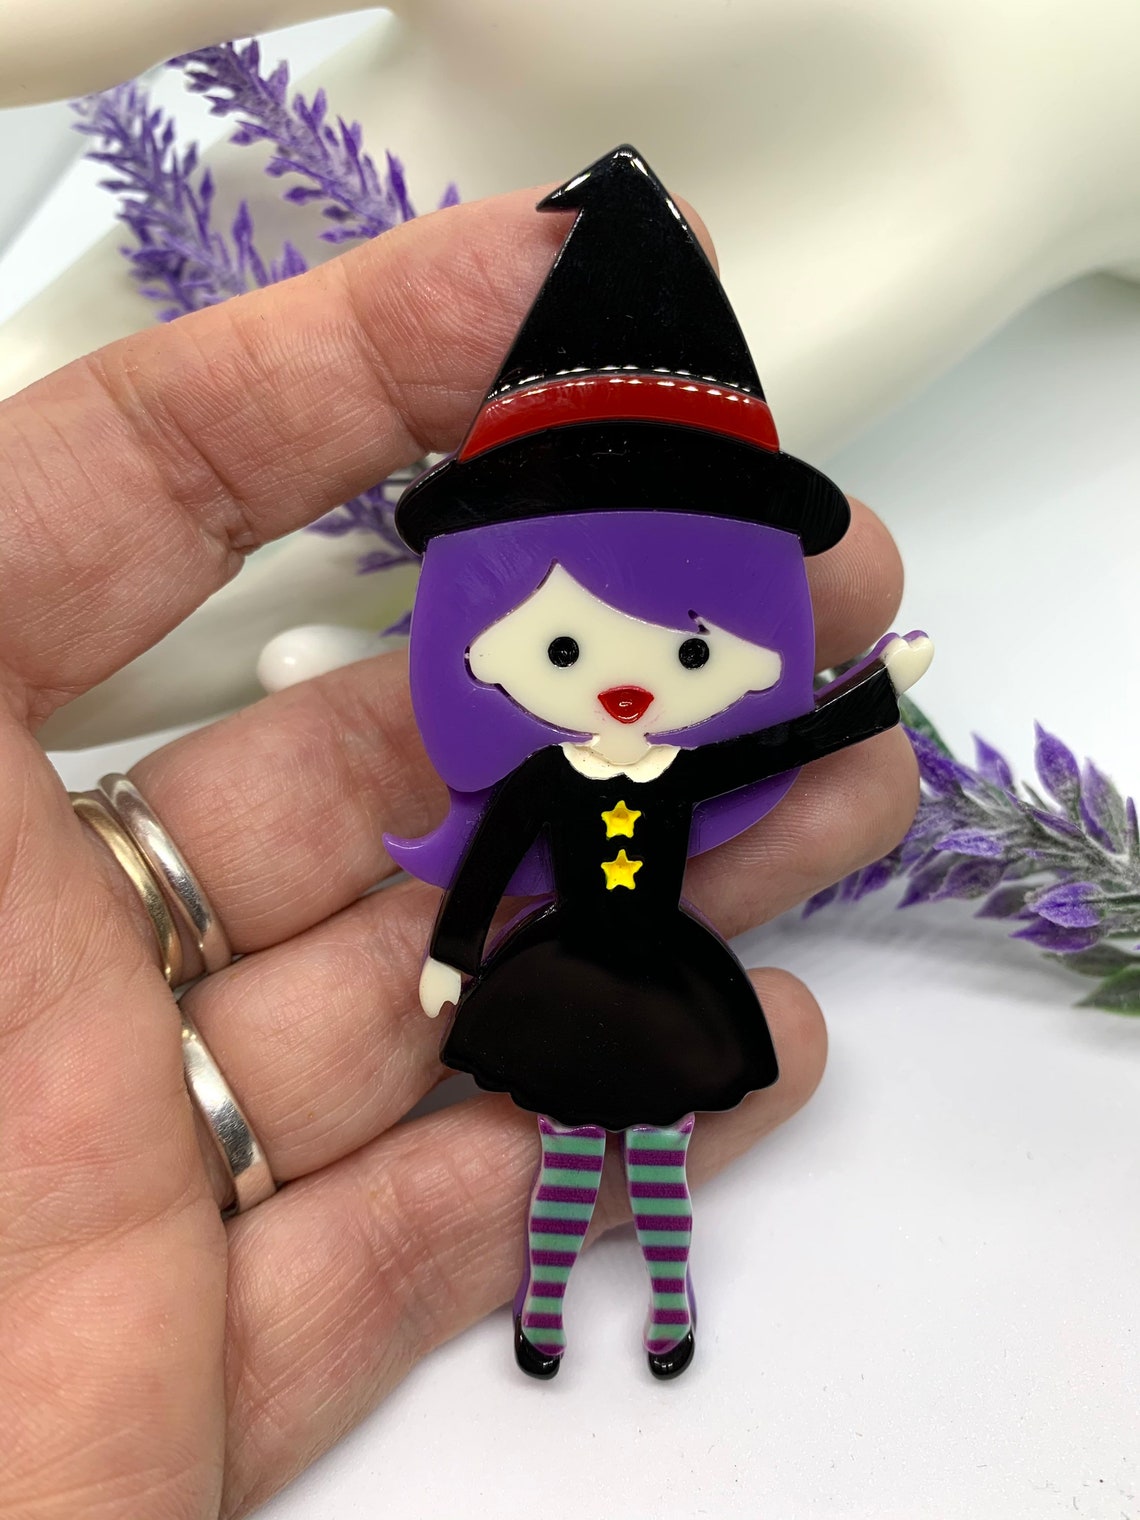 Gorgeous Wilomena the Purple Haired Witch With Pippin - Etsy